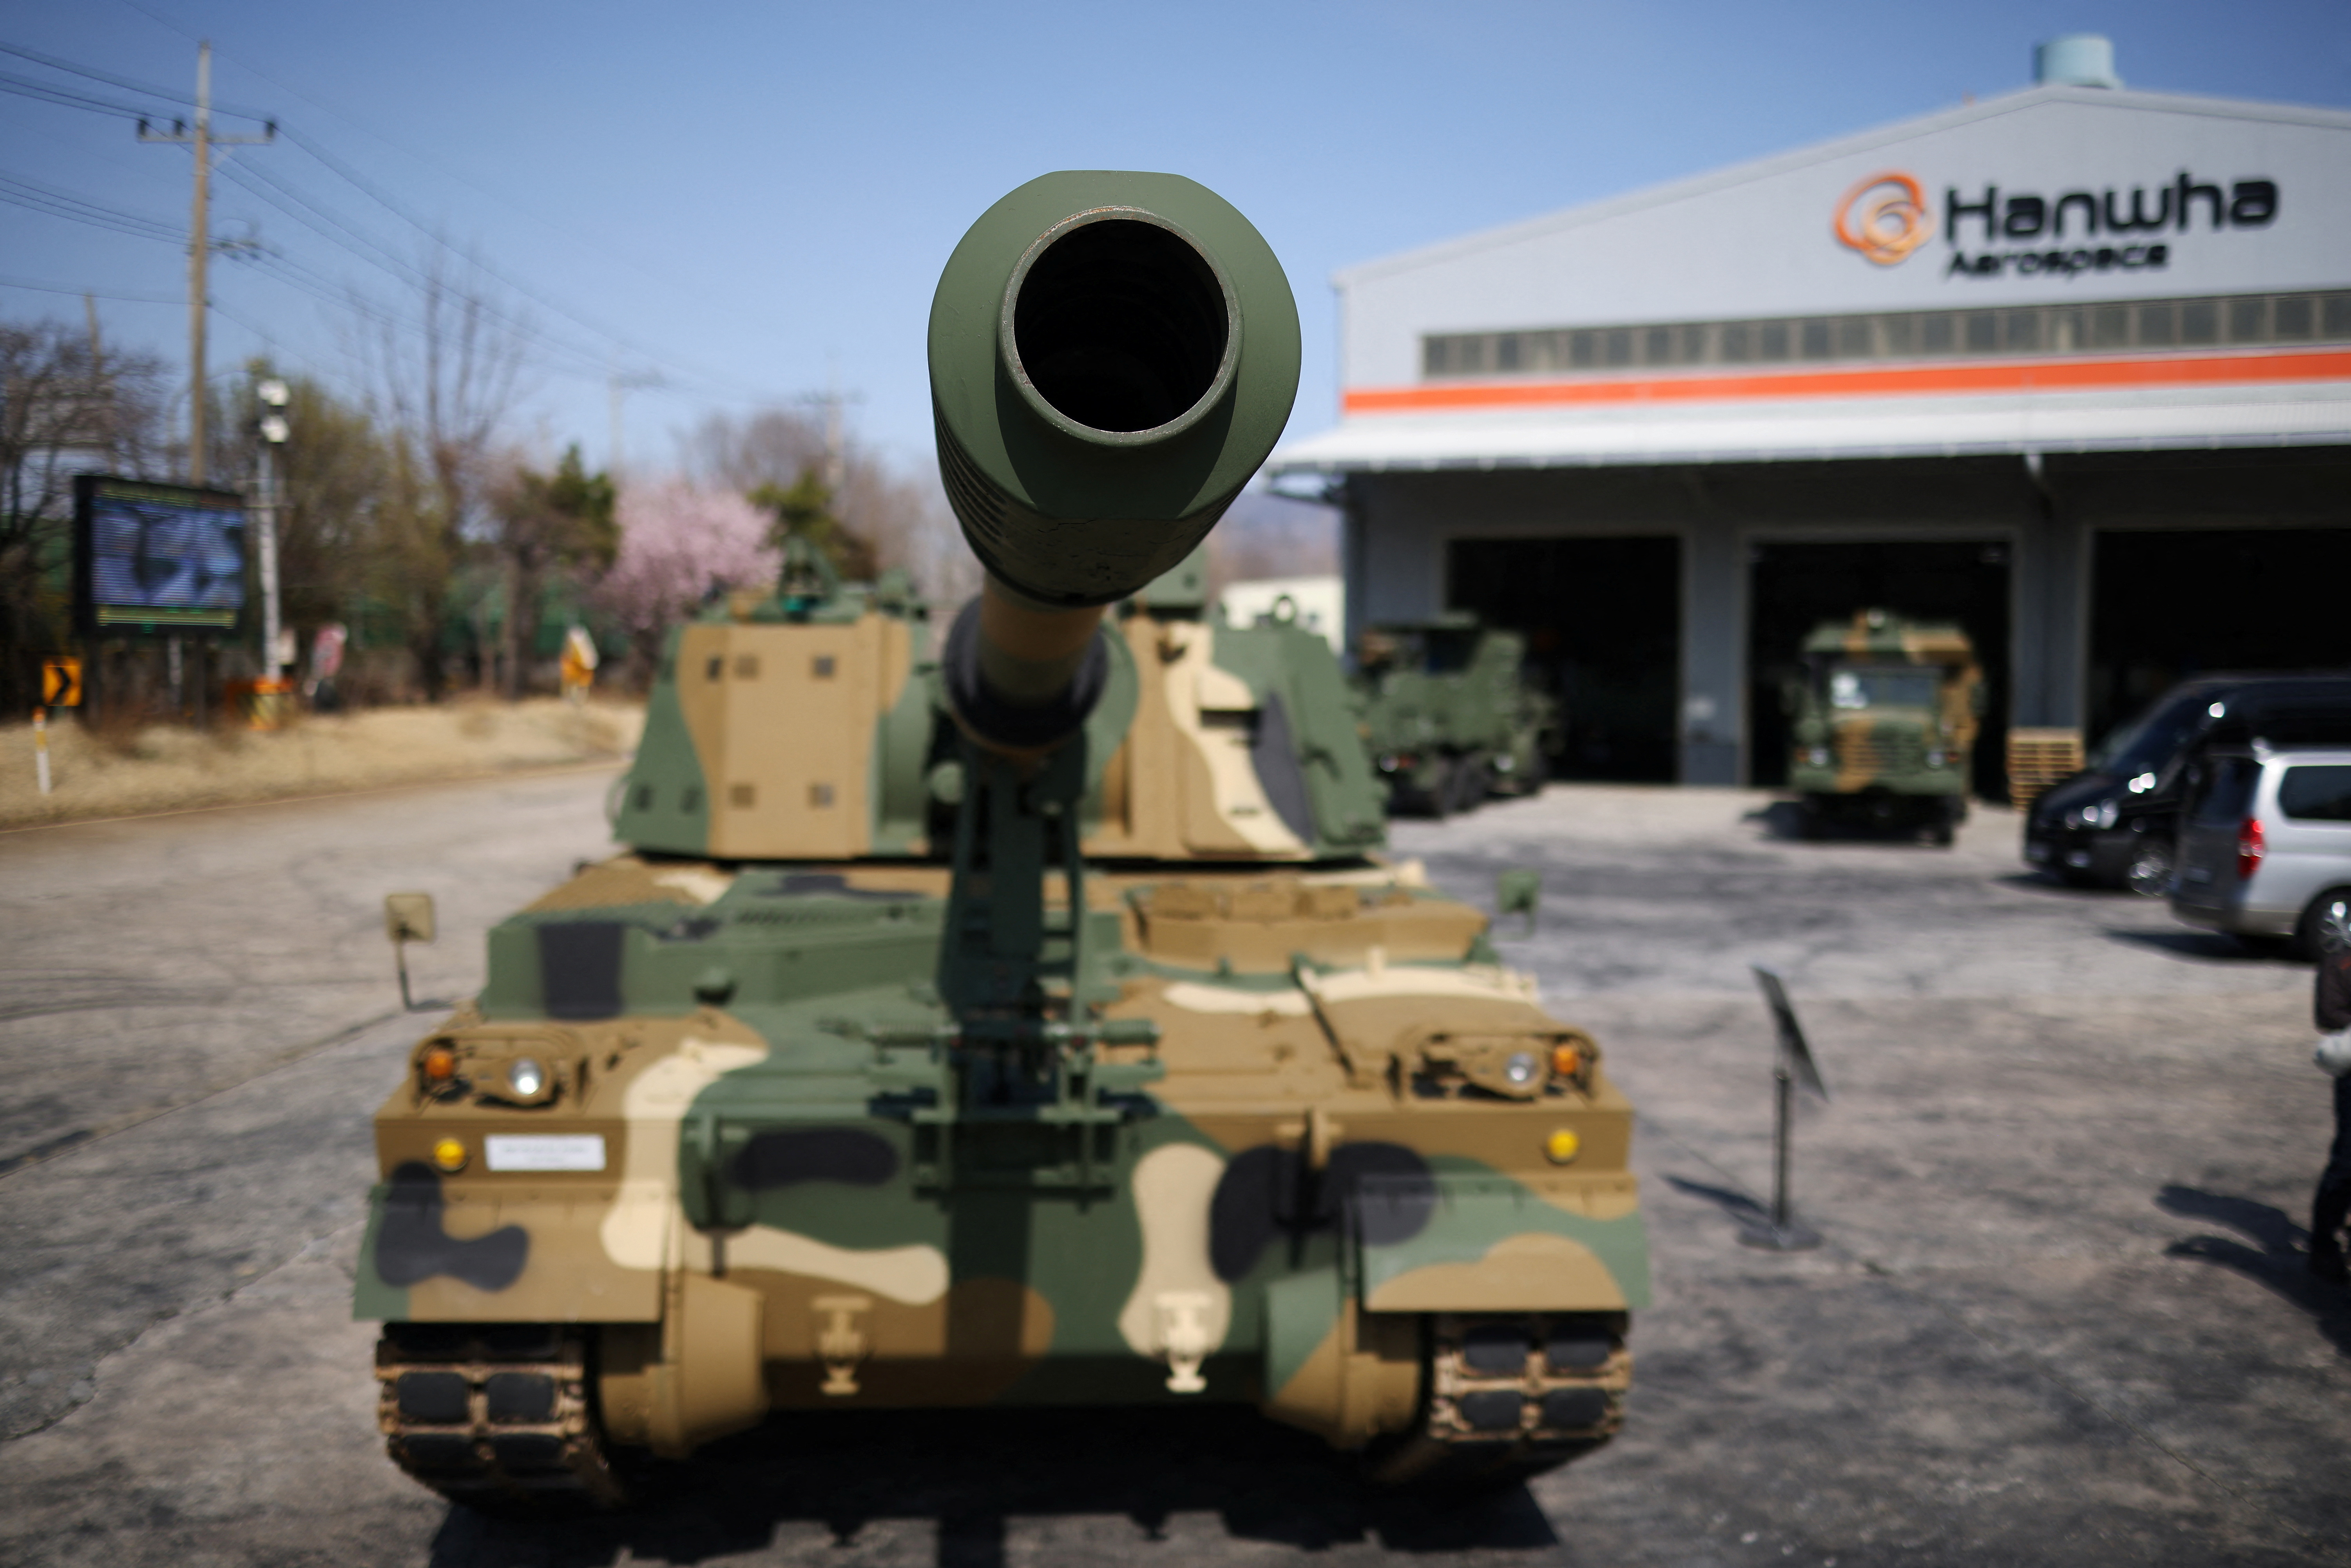 South Korea’s race to become one of the world’s biggest arms dealers